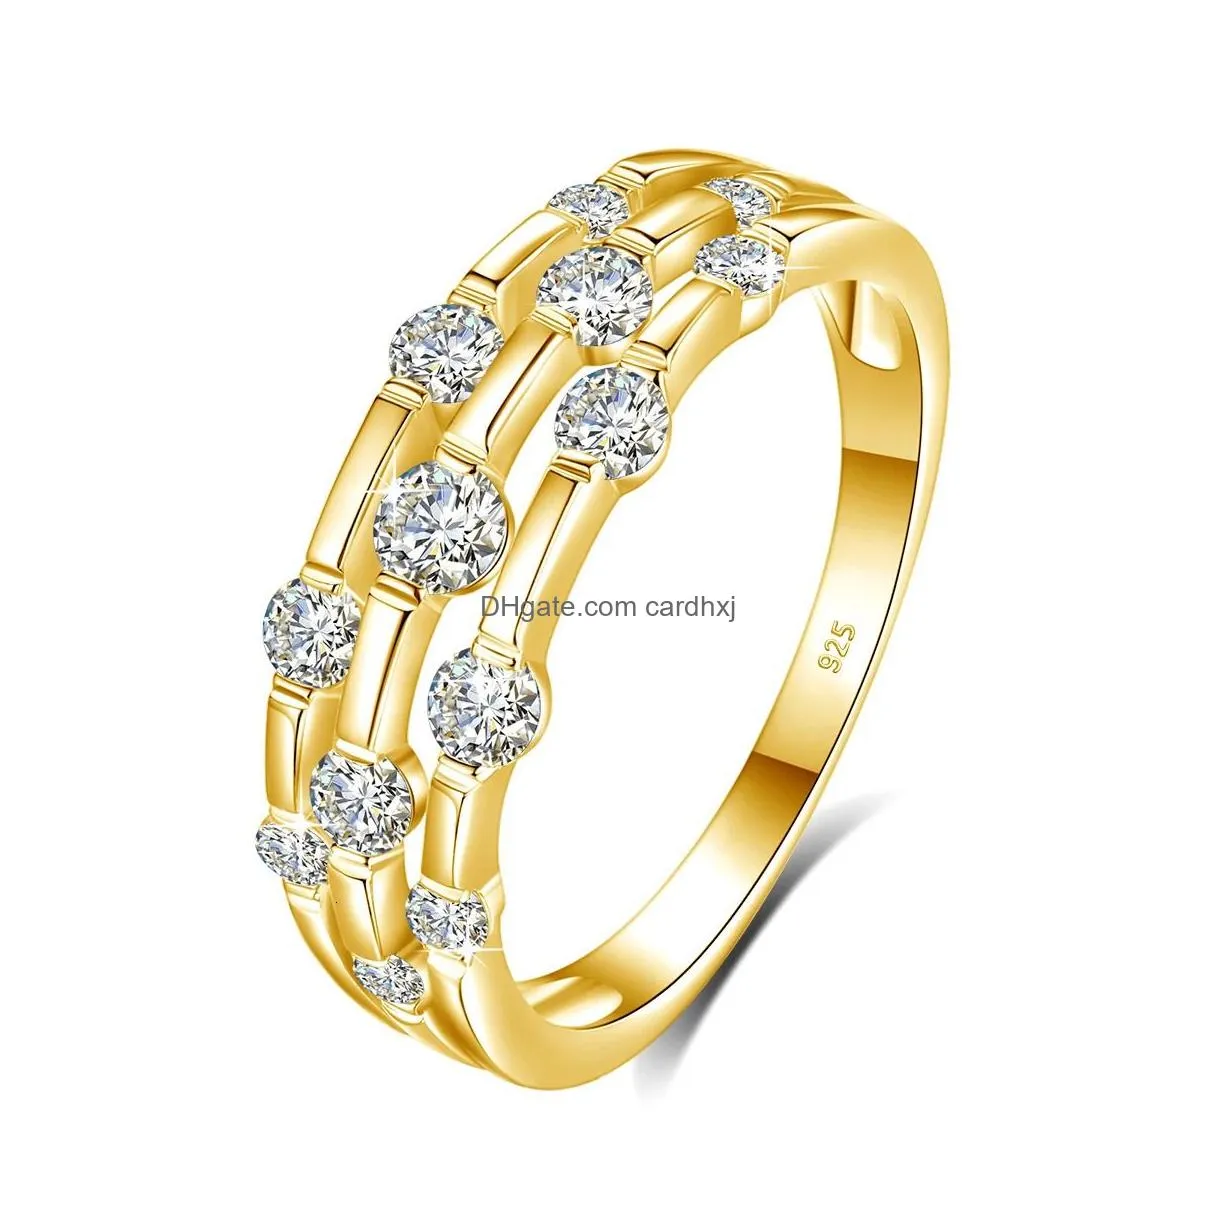 Wedding Rings Wedding Rings Certificated For Women Solid 925 Sterling Sier Band Jewelry Gift Girl Pass Diamond Test 231021 Drop Delive Dh1Dr